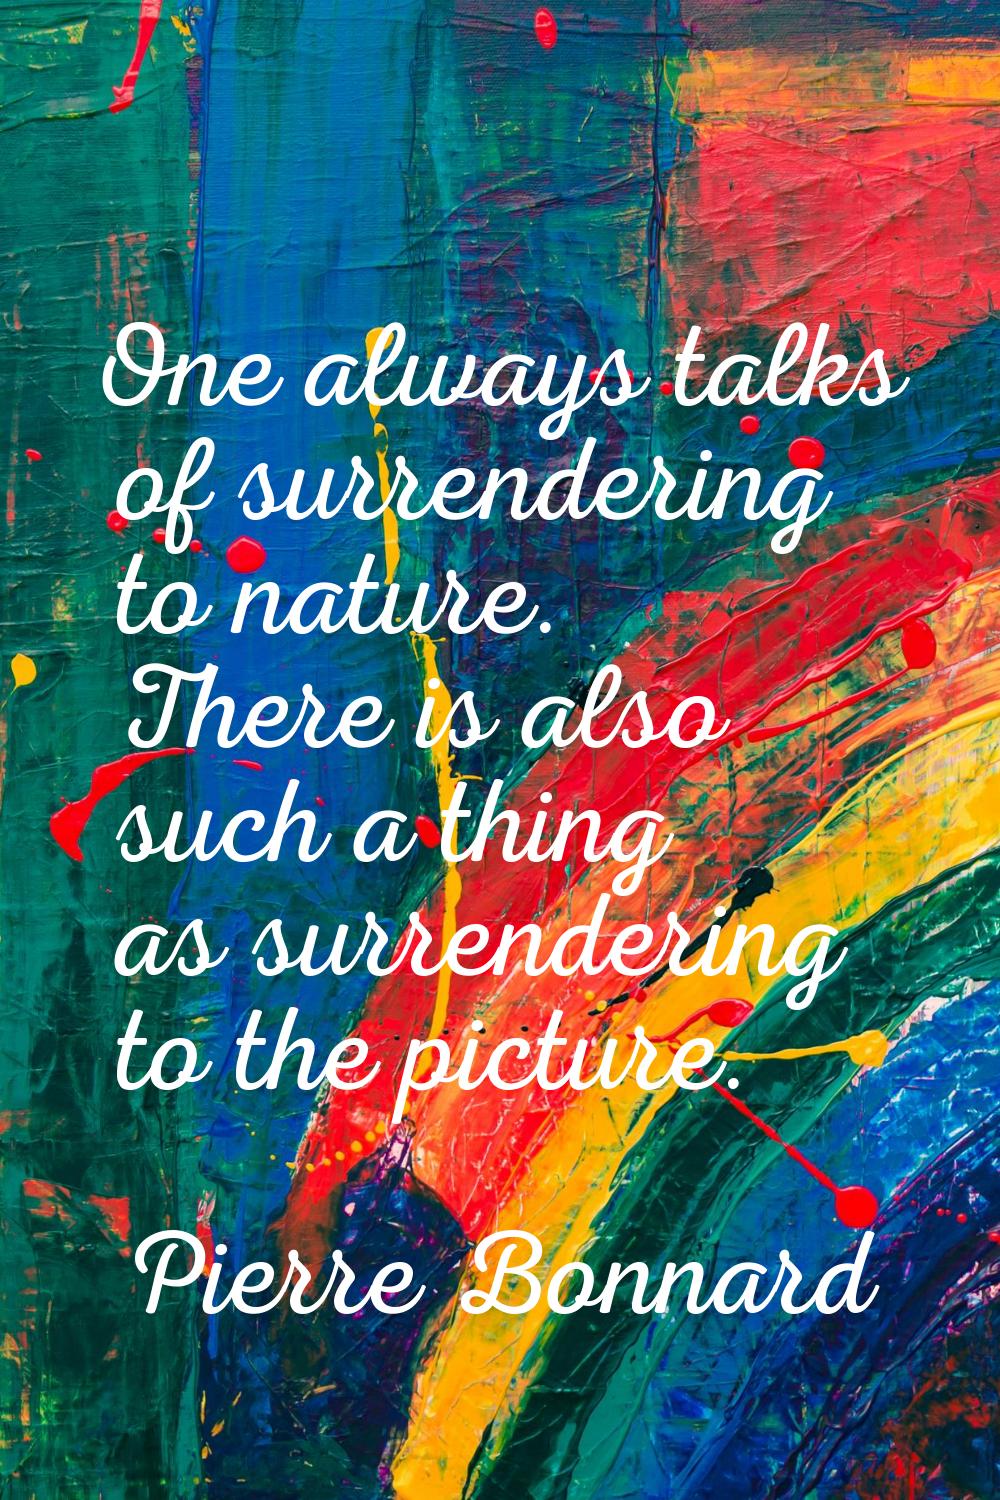 One always talks of surrendering to nature. There is also such a thing as surrendering to the pictu